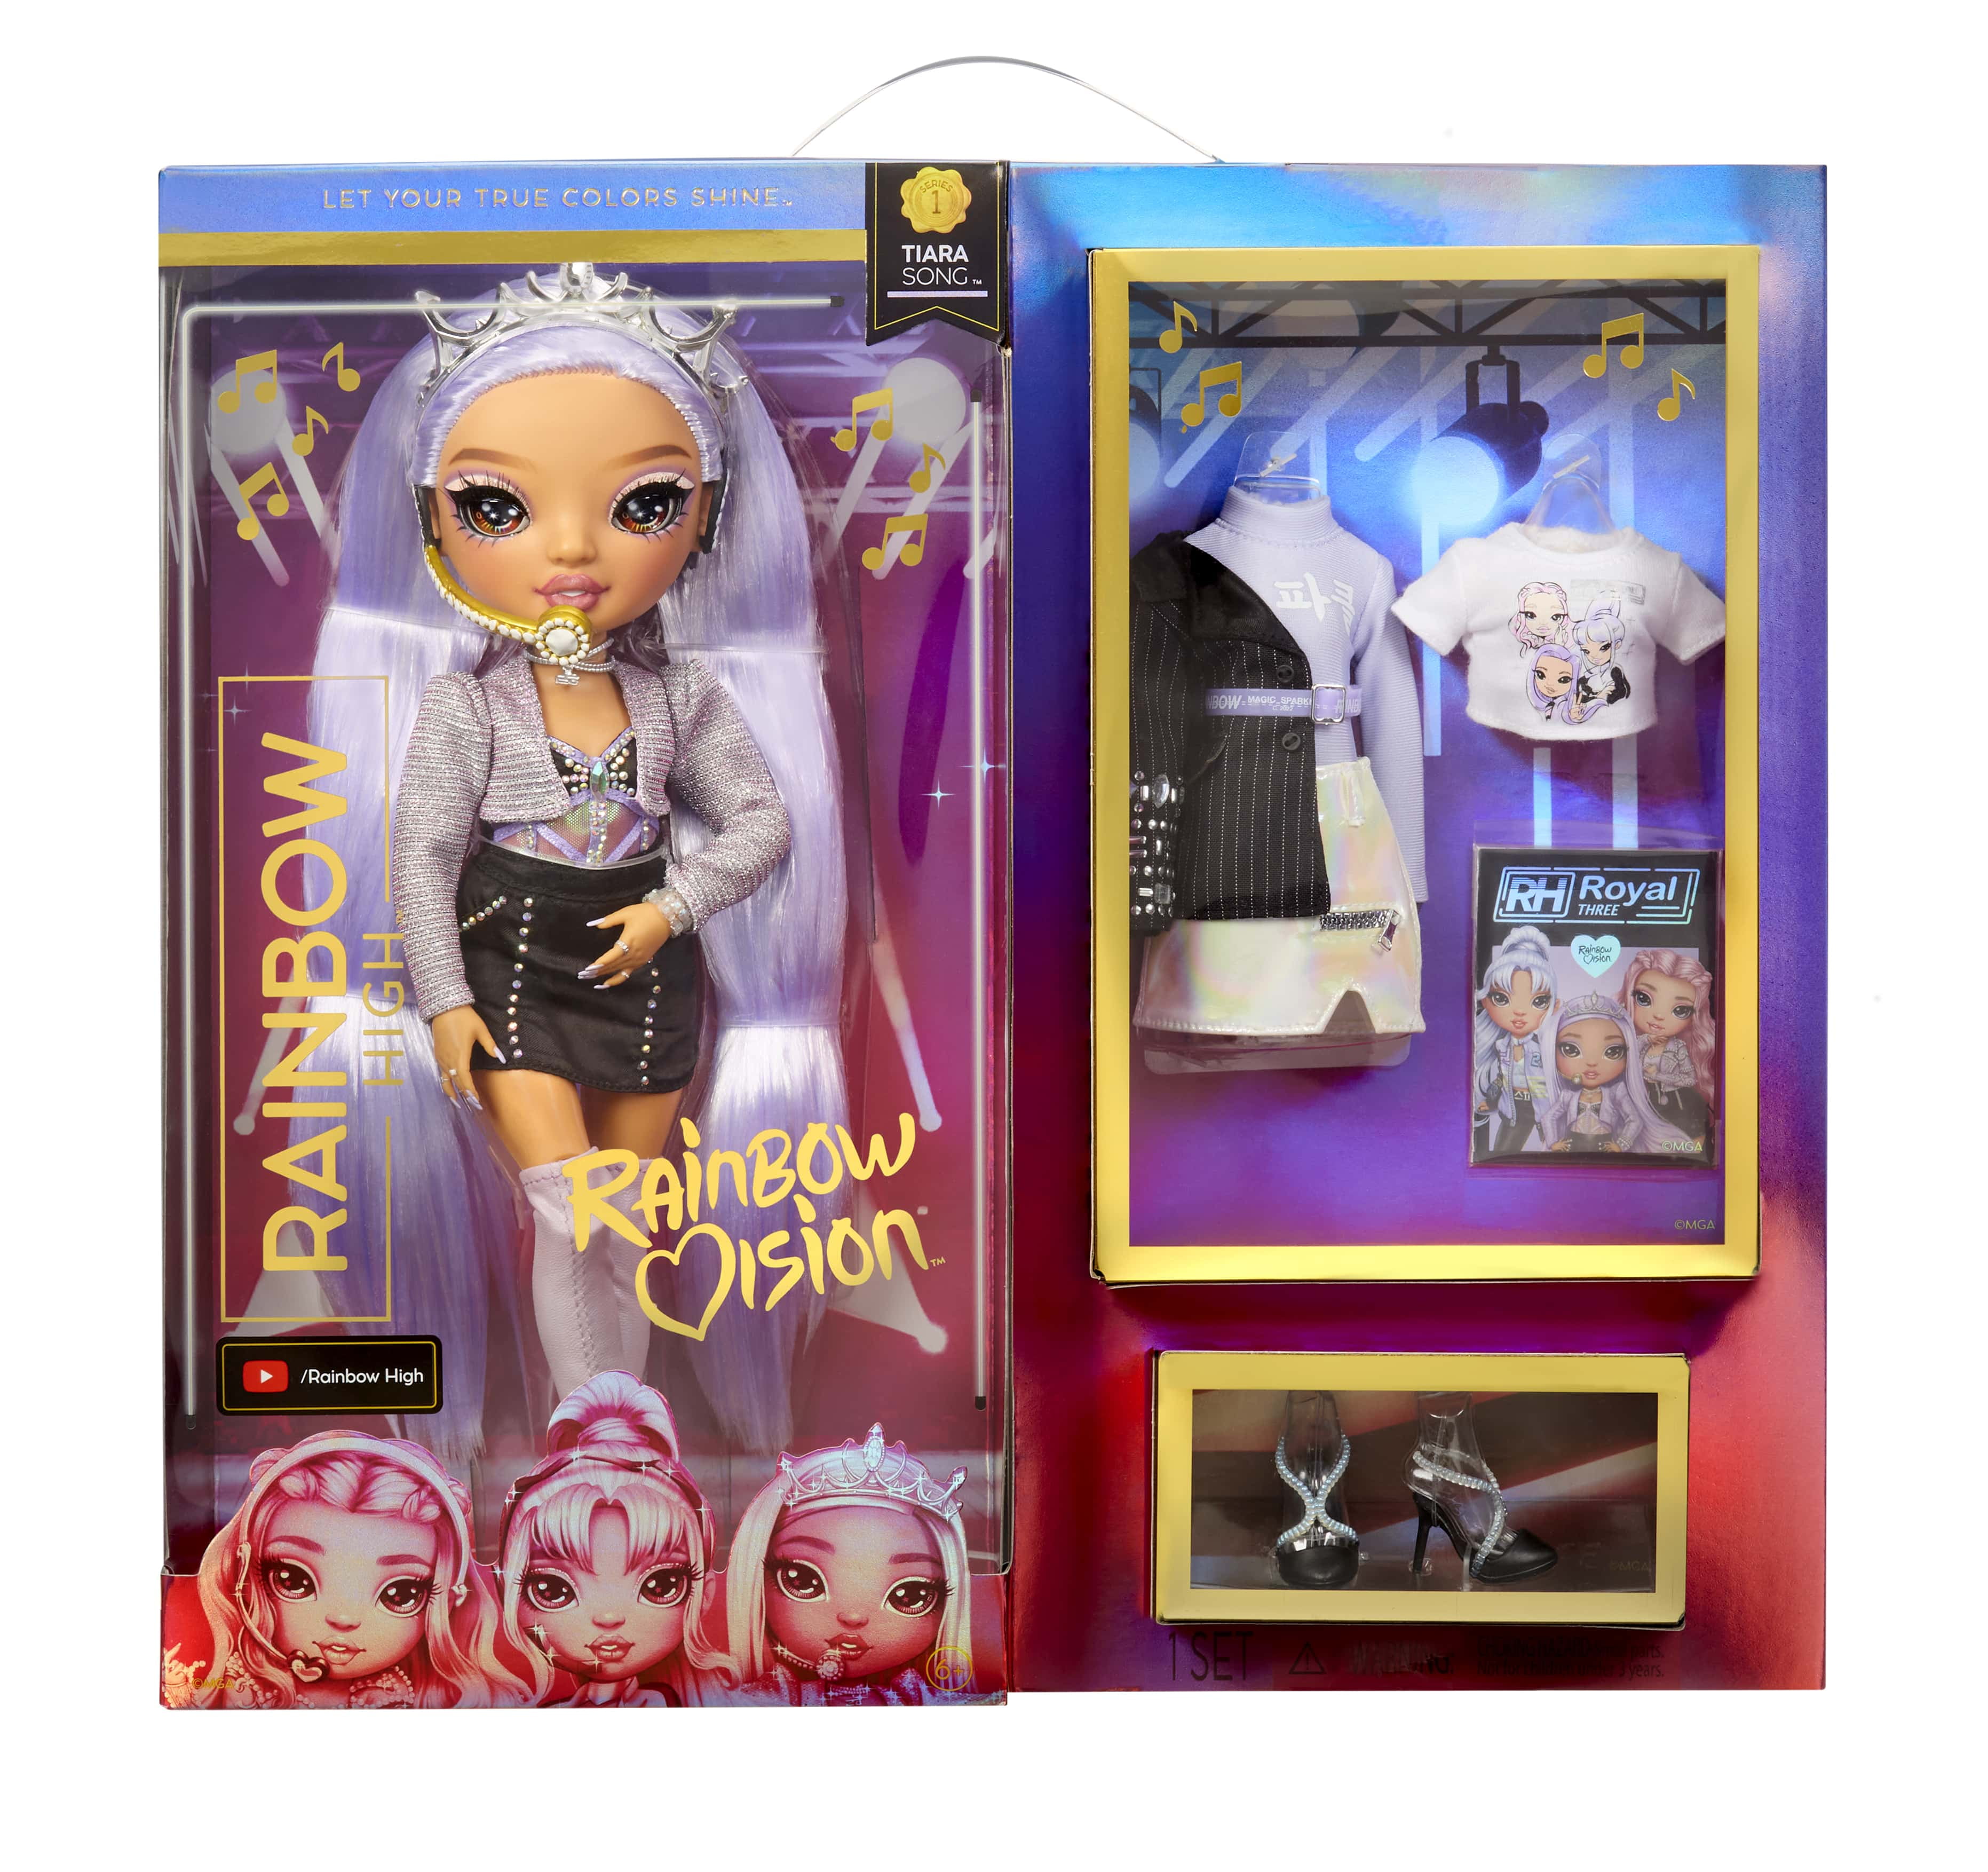 Rainbow High Rainbow Vision Royal Three K-pop  Tiara Song (Purple Lilac) Fashion Doll. 2 Designer Outfits to Mix & Match with Microphone Headset & Band Merch PLAYSET, Great Gift for Kids 6-12 Year